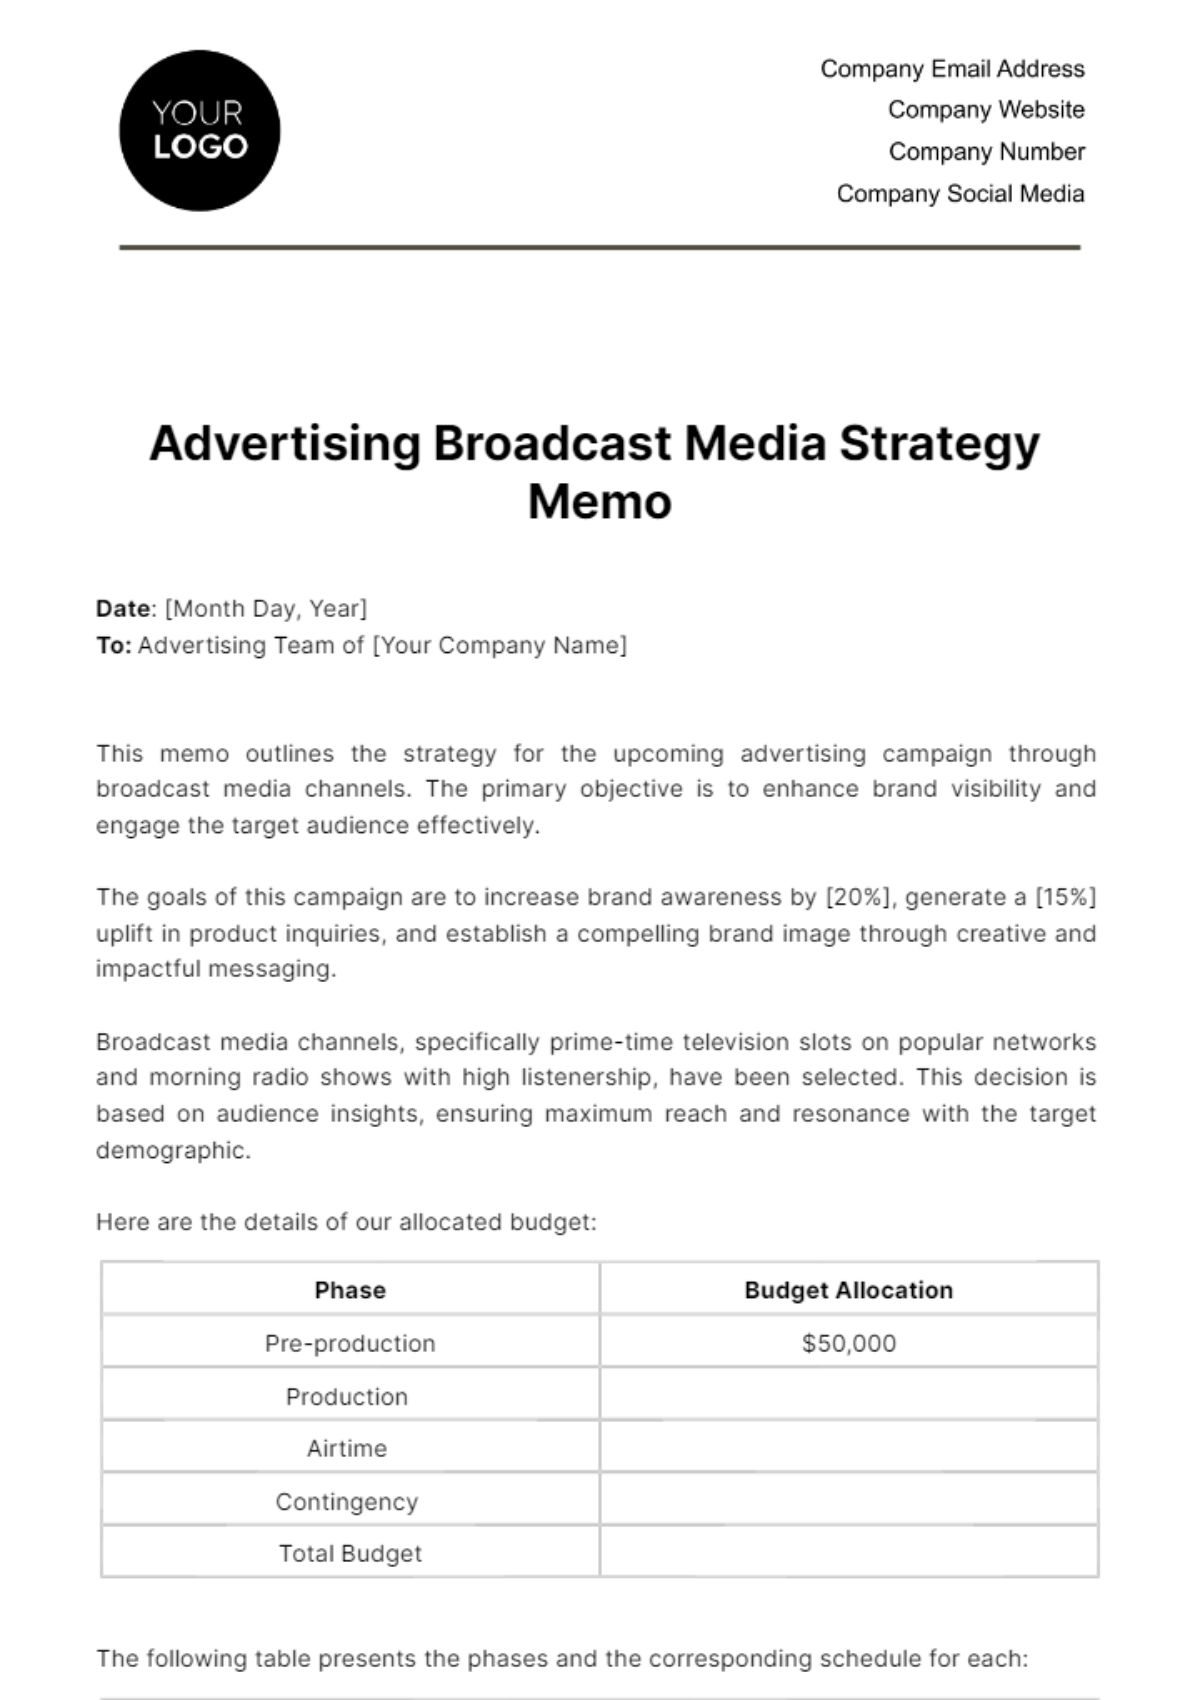 Free Advertising Broadcast Media Strategy Memo Template